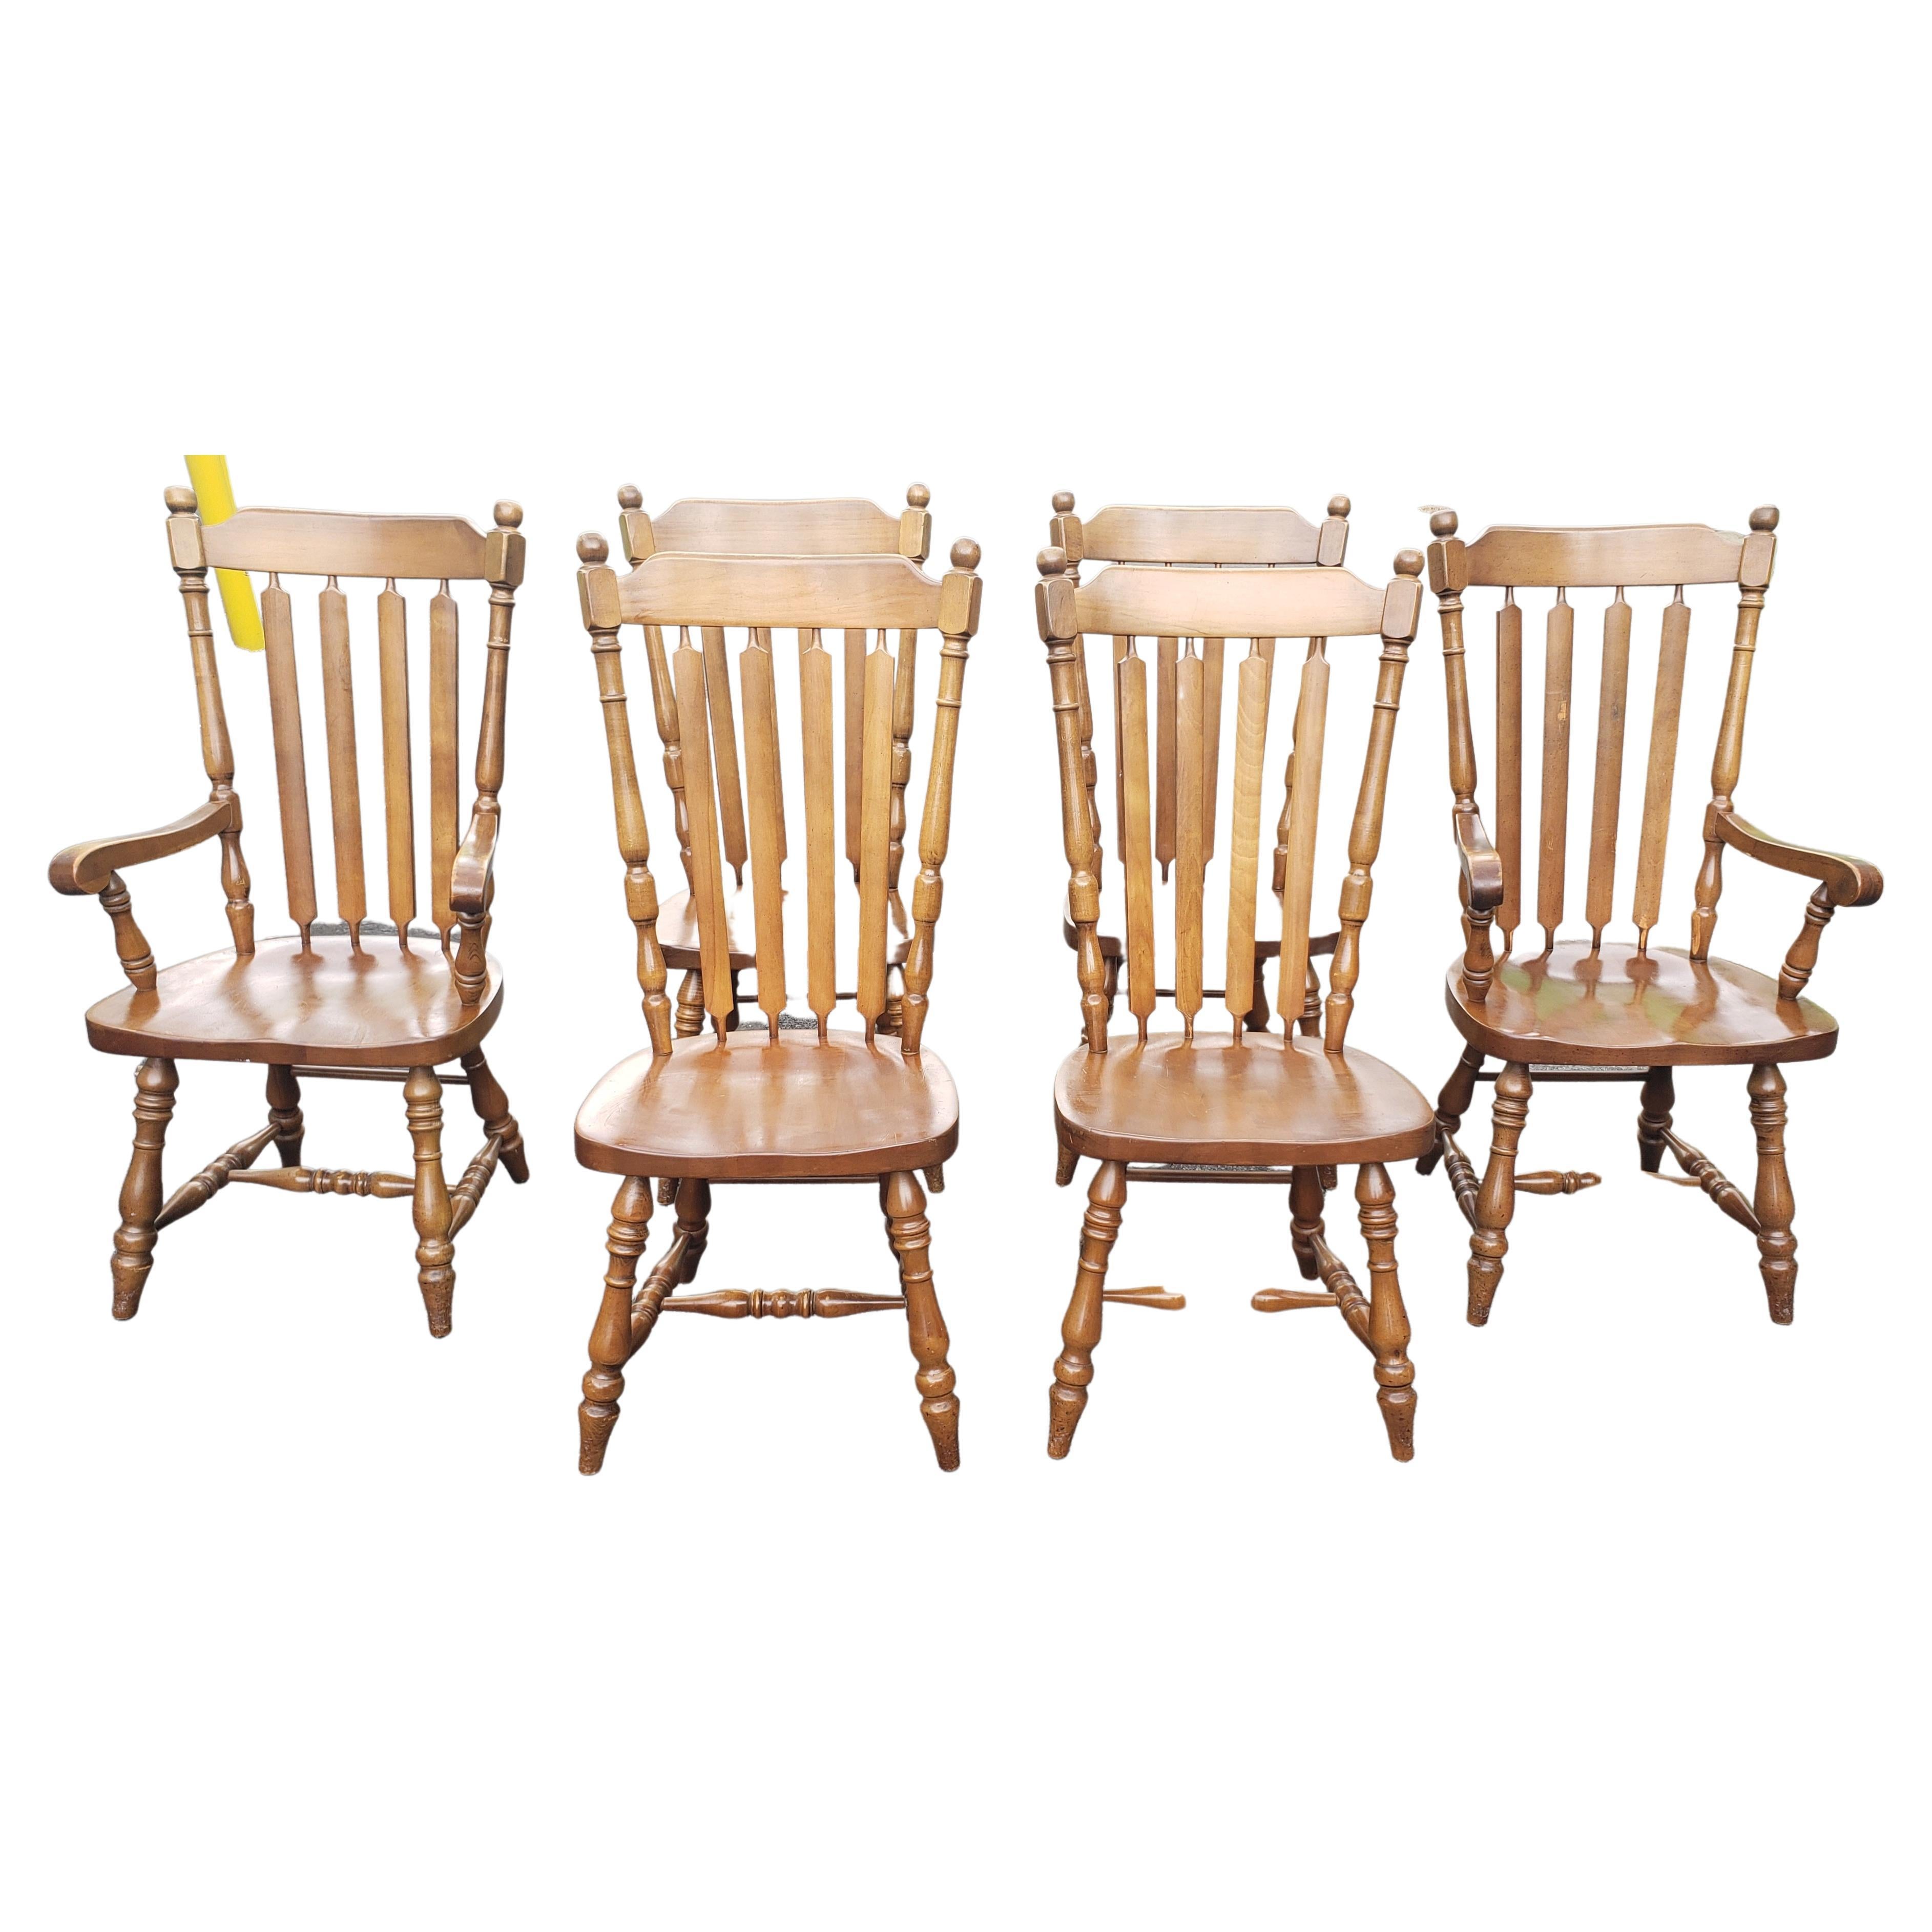 A beautiful set of J.D.V.'s High Back Heavy Duty Solid Maple Country Dining Chairs.
Set of with 2 captain chairs and 4 side chairs. Extremely solid heavy duty chairs. High back 43.5